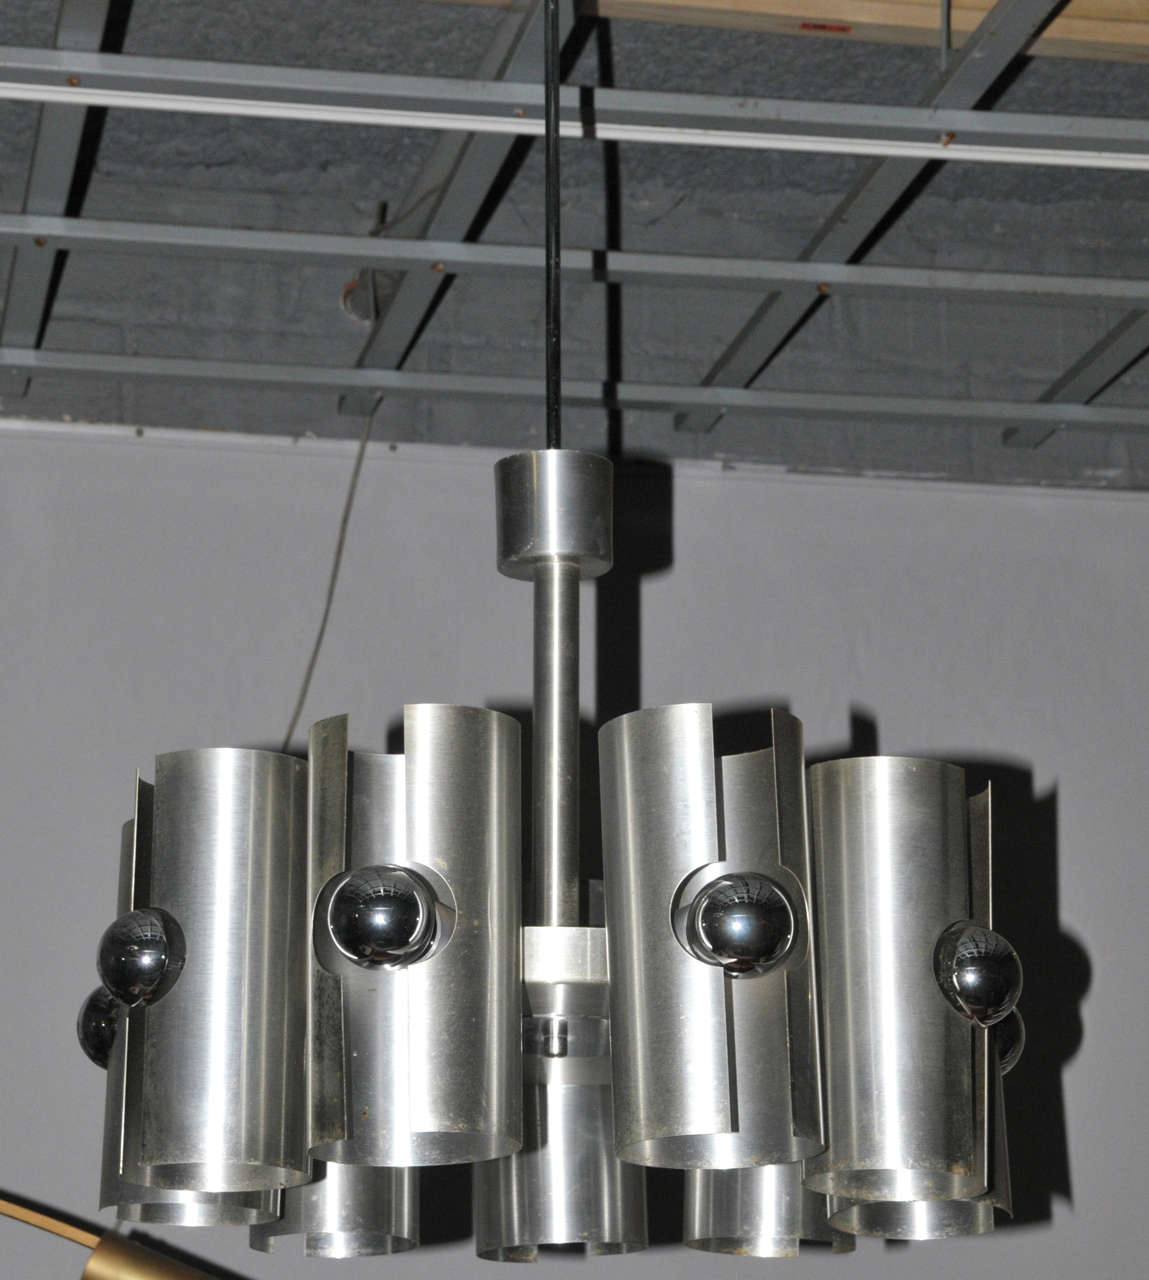 1970s chandelier in brushed steel and steel. Ten lights. Wired for European use.